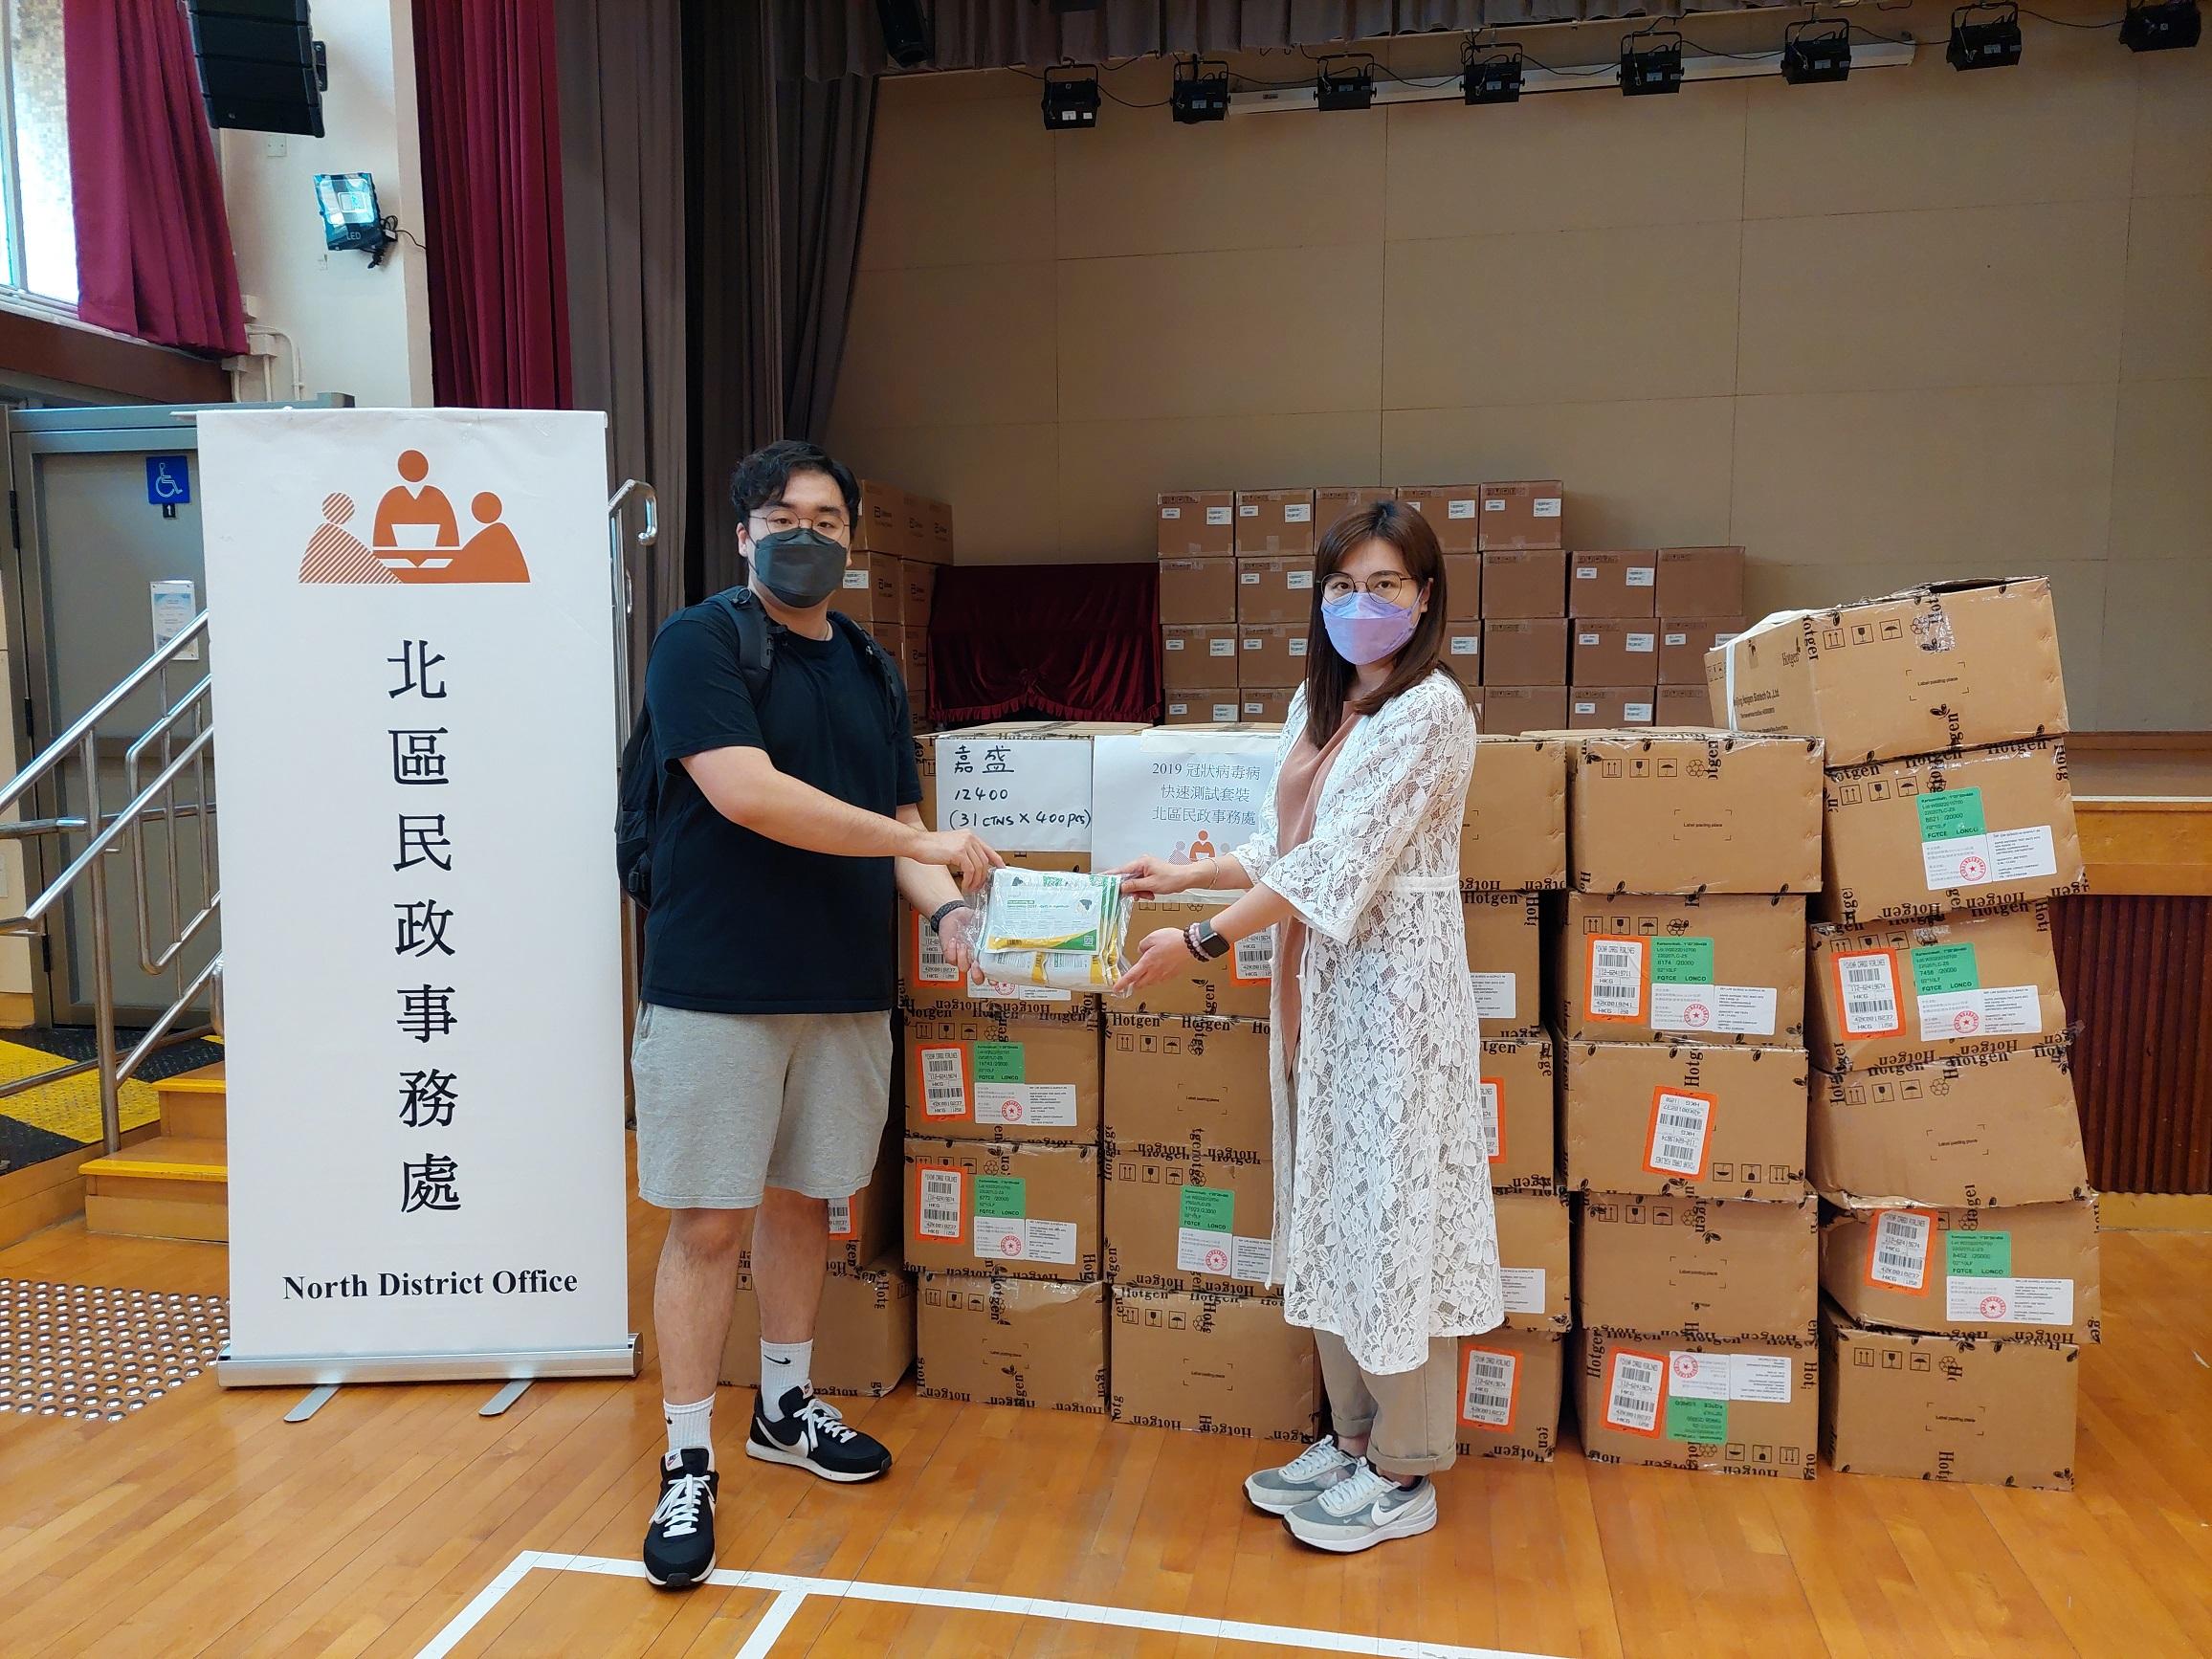 The North District Office today (March 18) distributed COVID-19 rapid test kits to households, cleansing workers and property management staff living and working in Ka Shing Court for voluntary testing through the property management company.